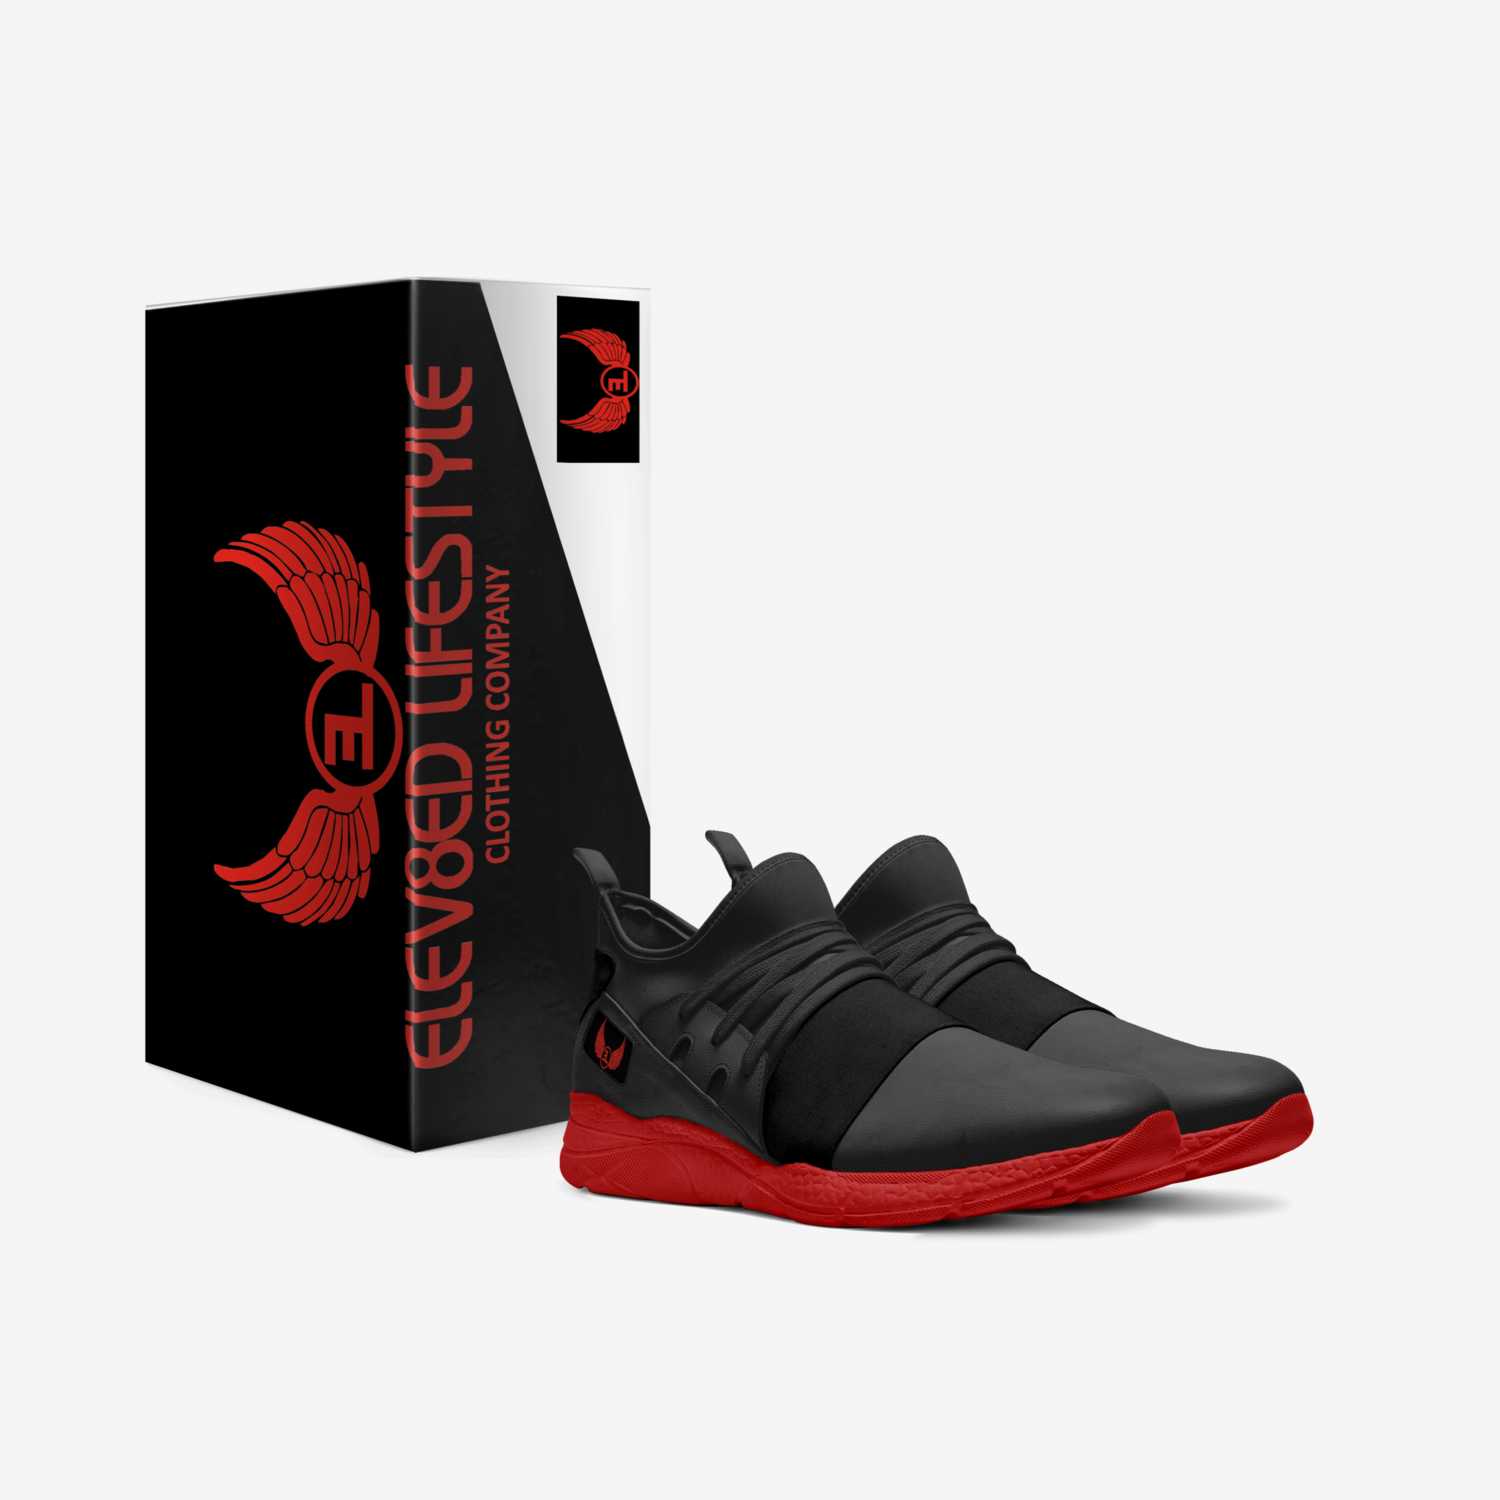 Elev8ed Runner custom made in Italy shoes by Larry Stacy | Box view